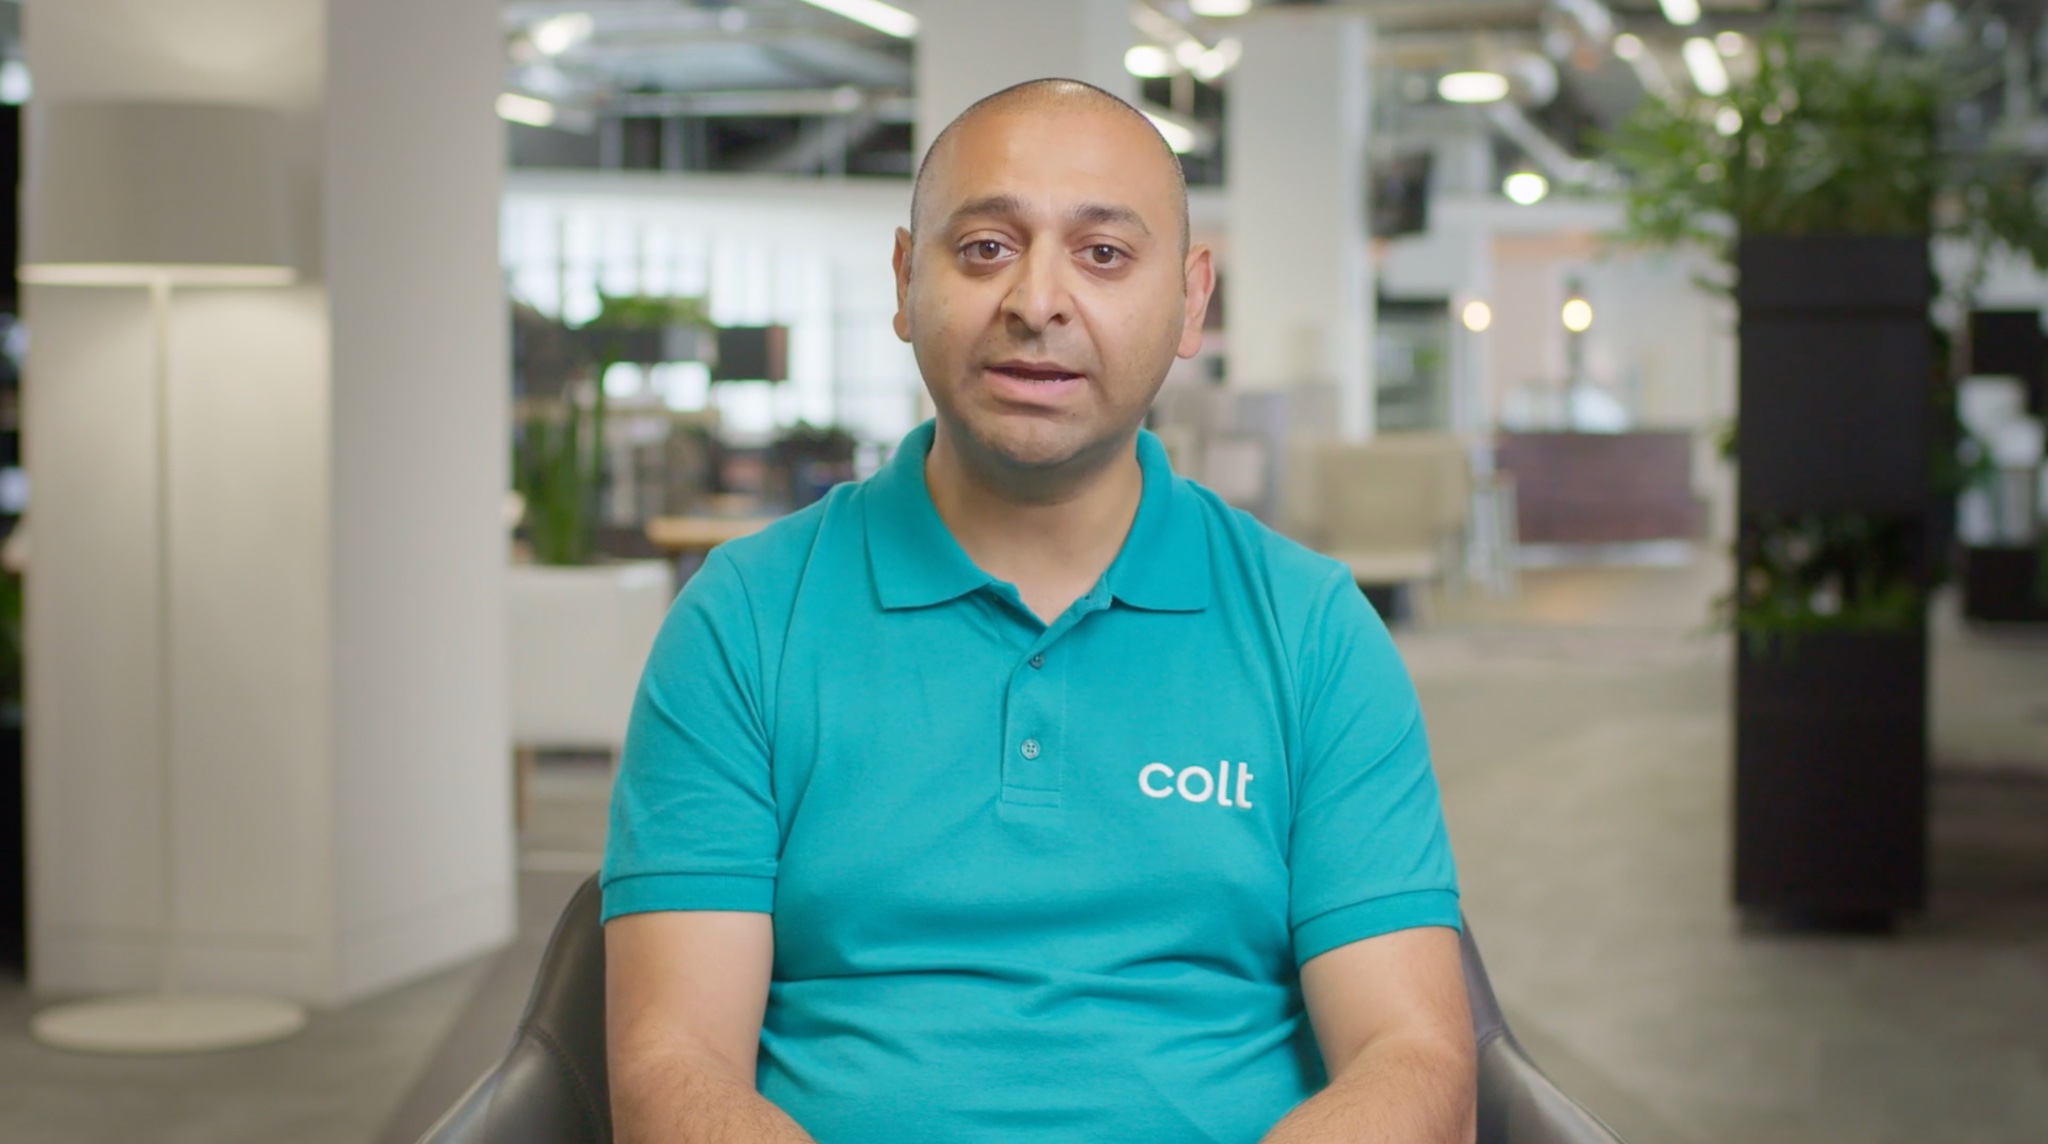 a photograph of a man in a blue tshirt with the logo for tech company Colt